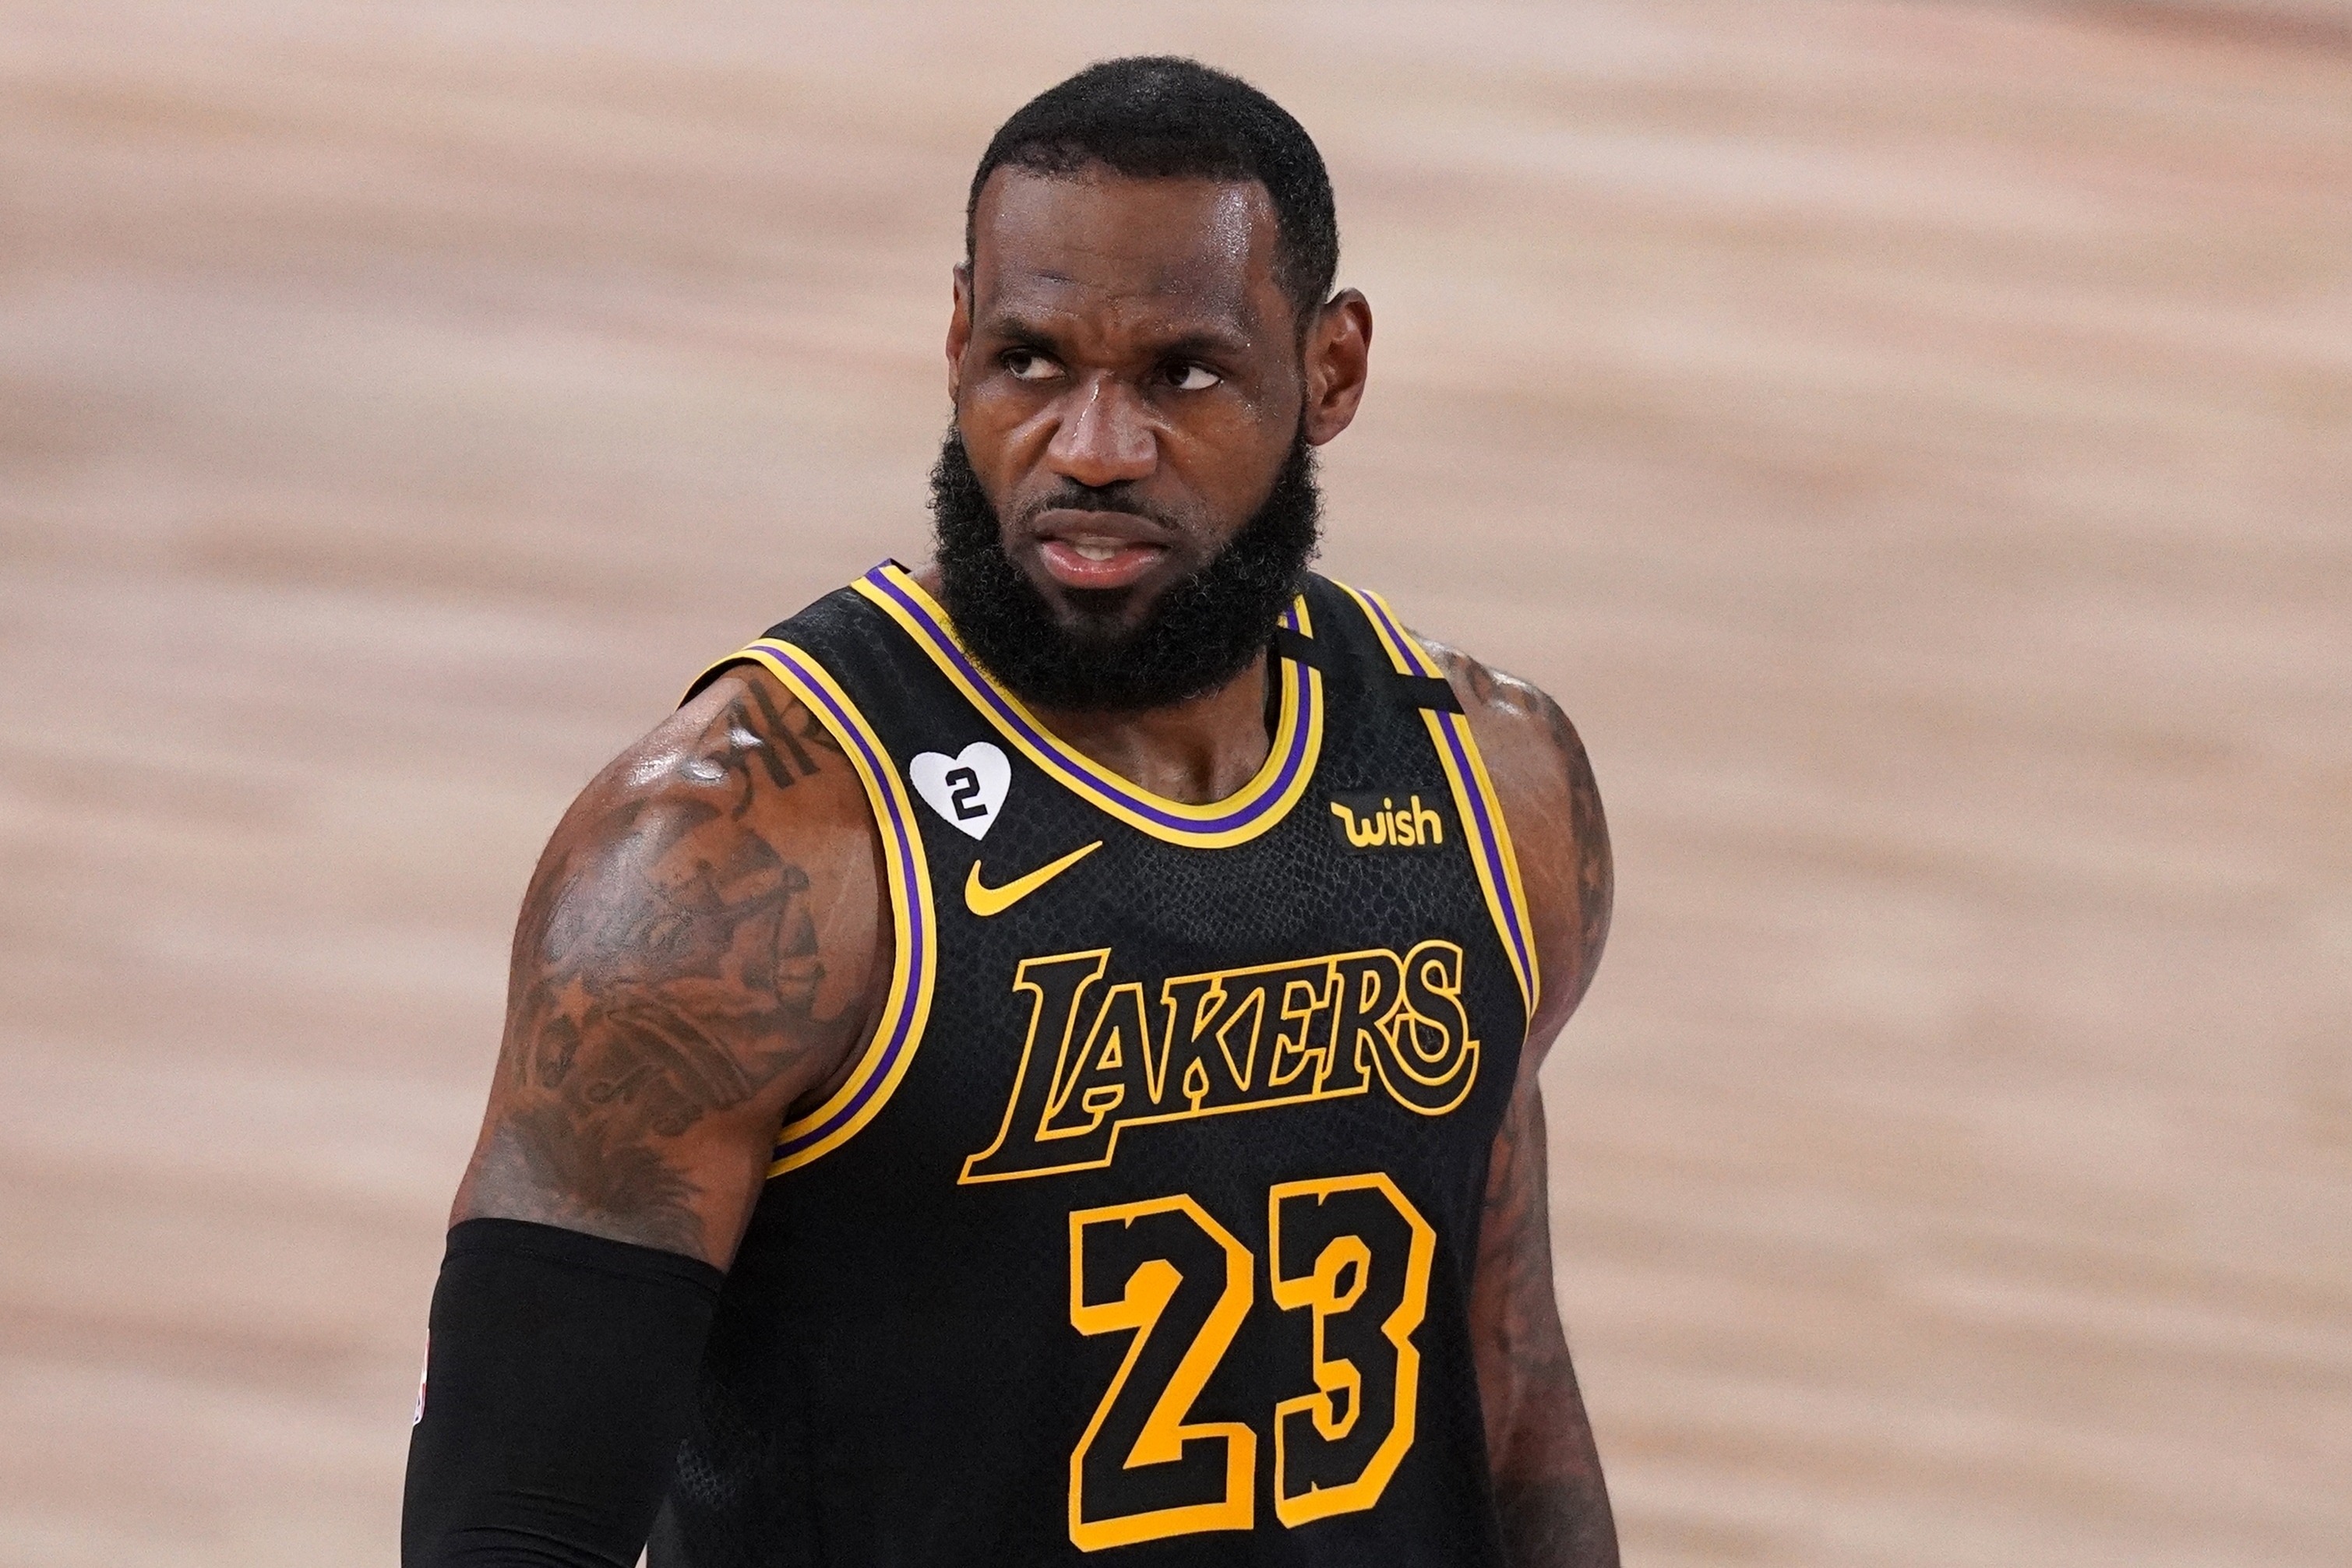 LeBron on course to join legends with jerseys retired by multiple